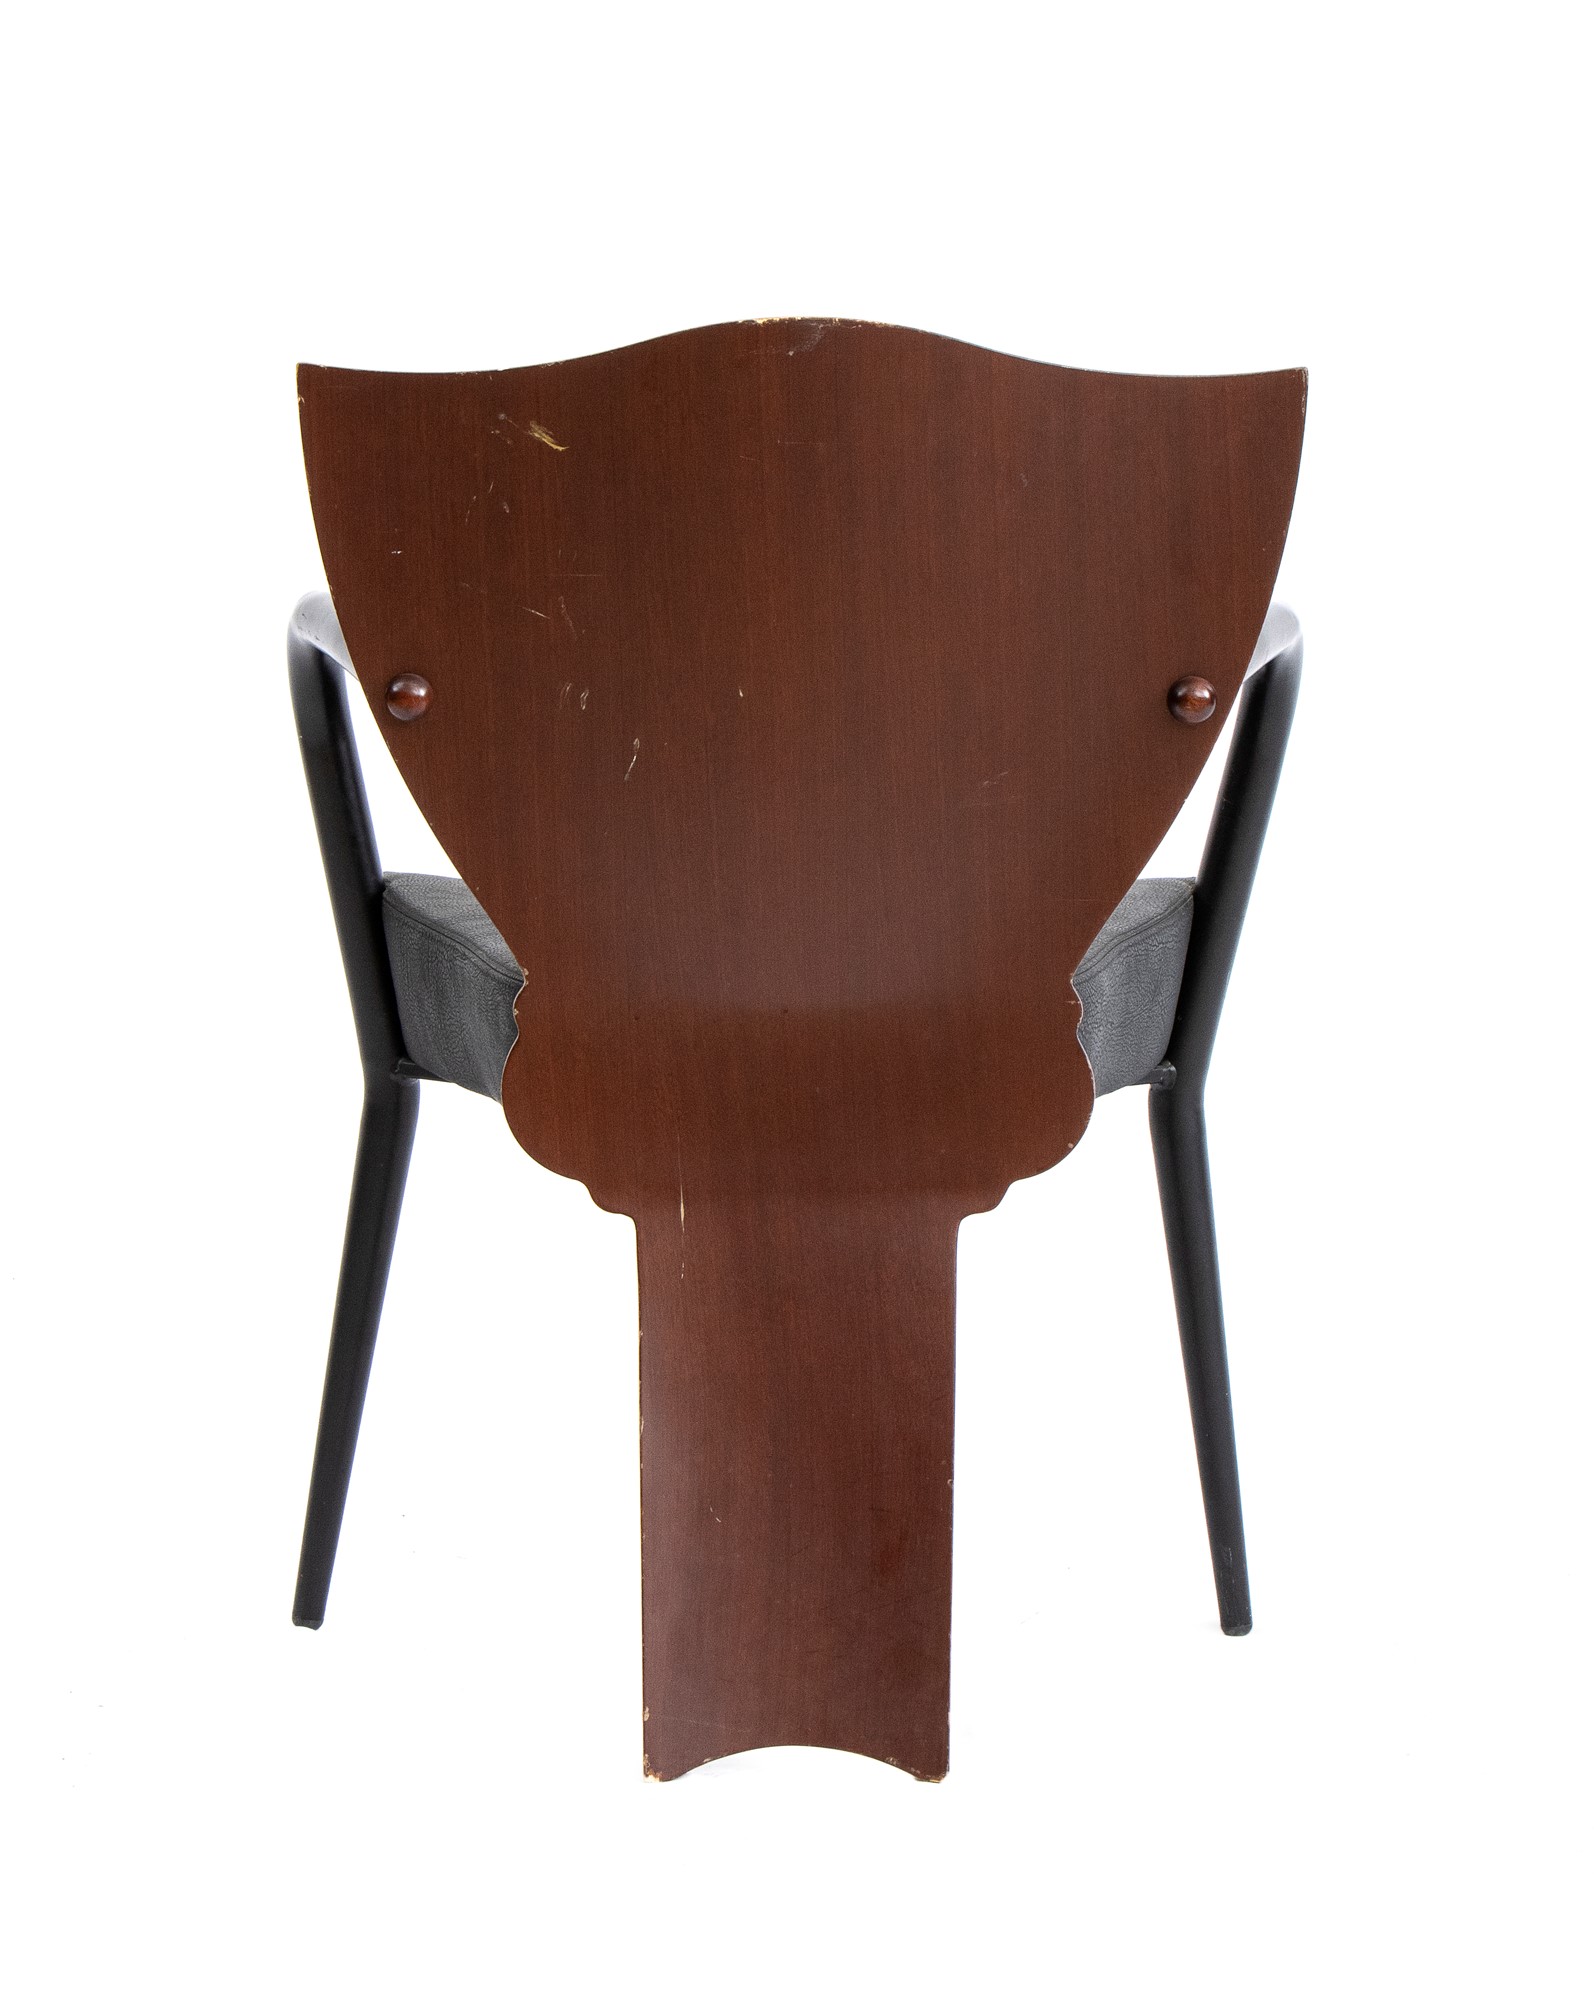 Four chairs mod. Dalami - Image 10 of 15